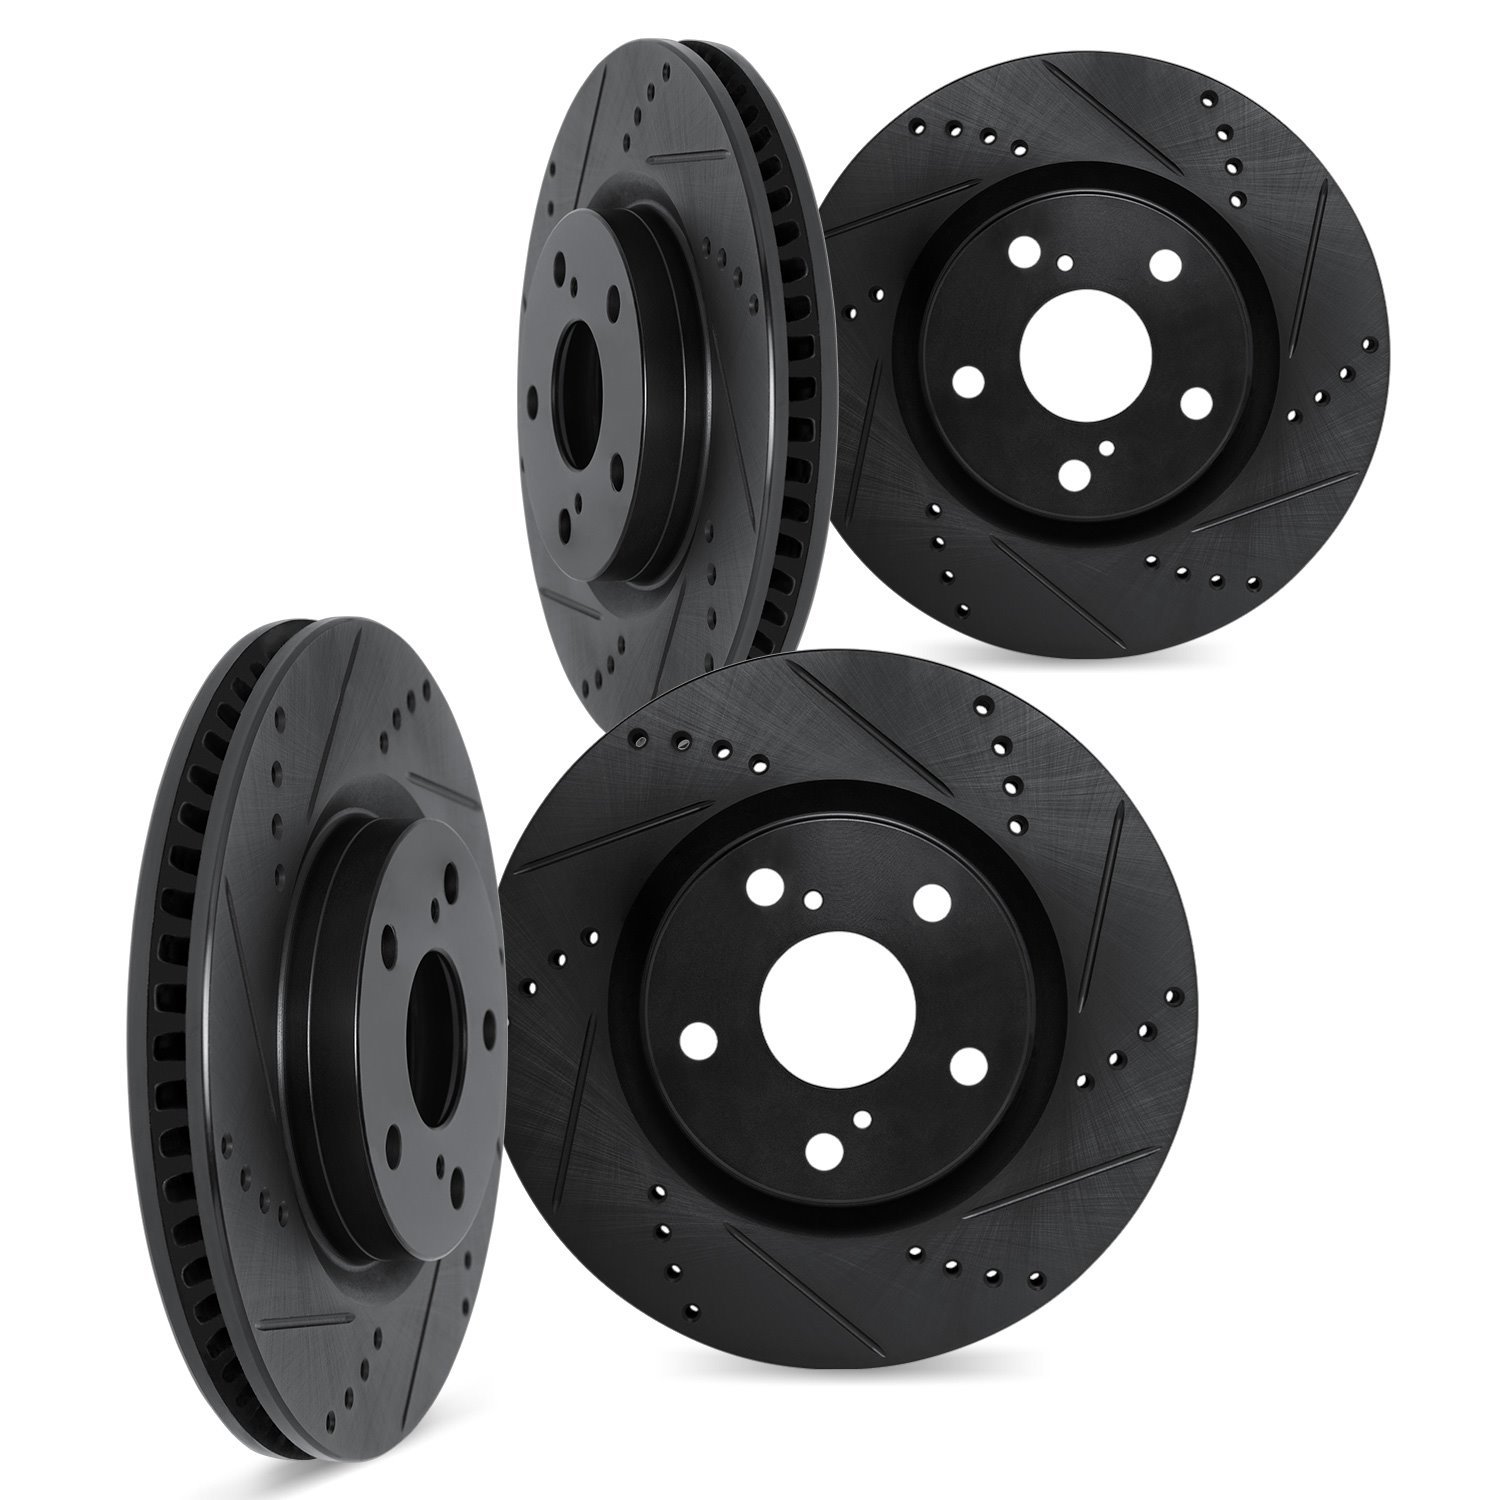 8004-31070 Drilled/Slotted Brake Rotors [Black], 2005-2008 BMW, Position: Front and Rear